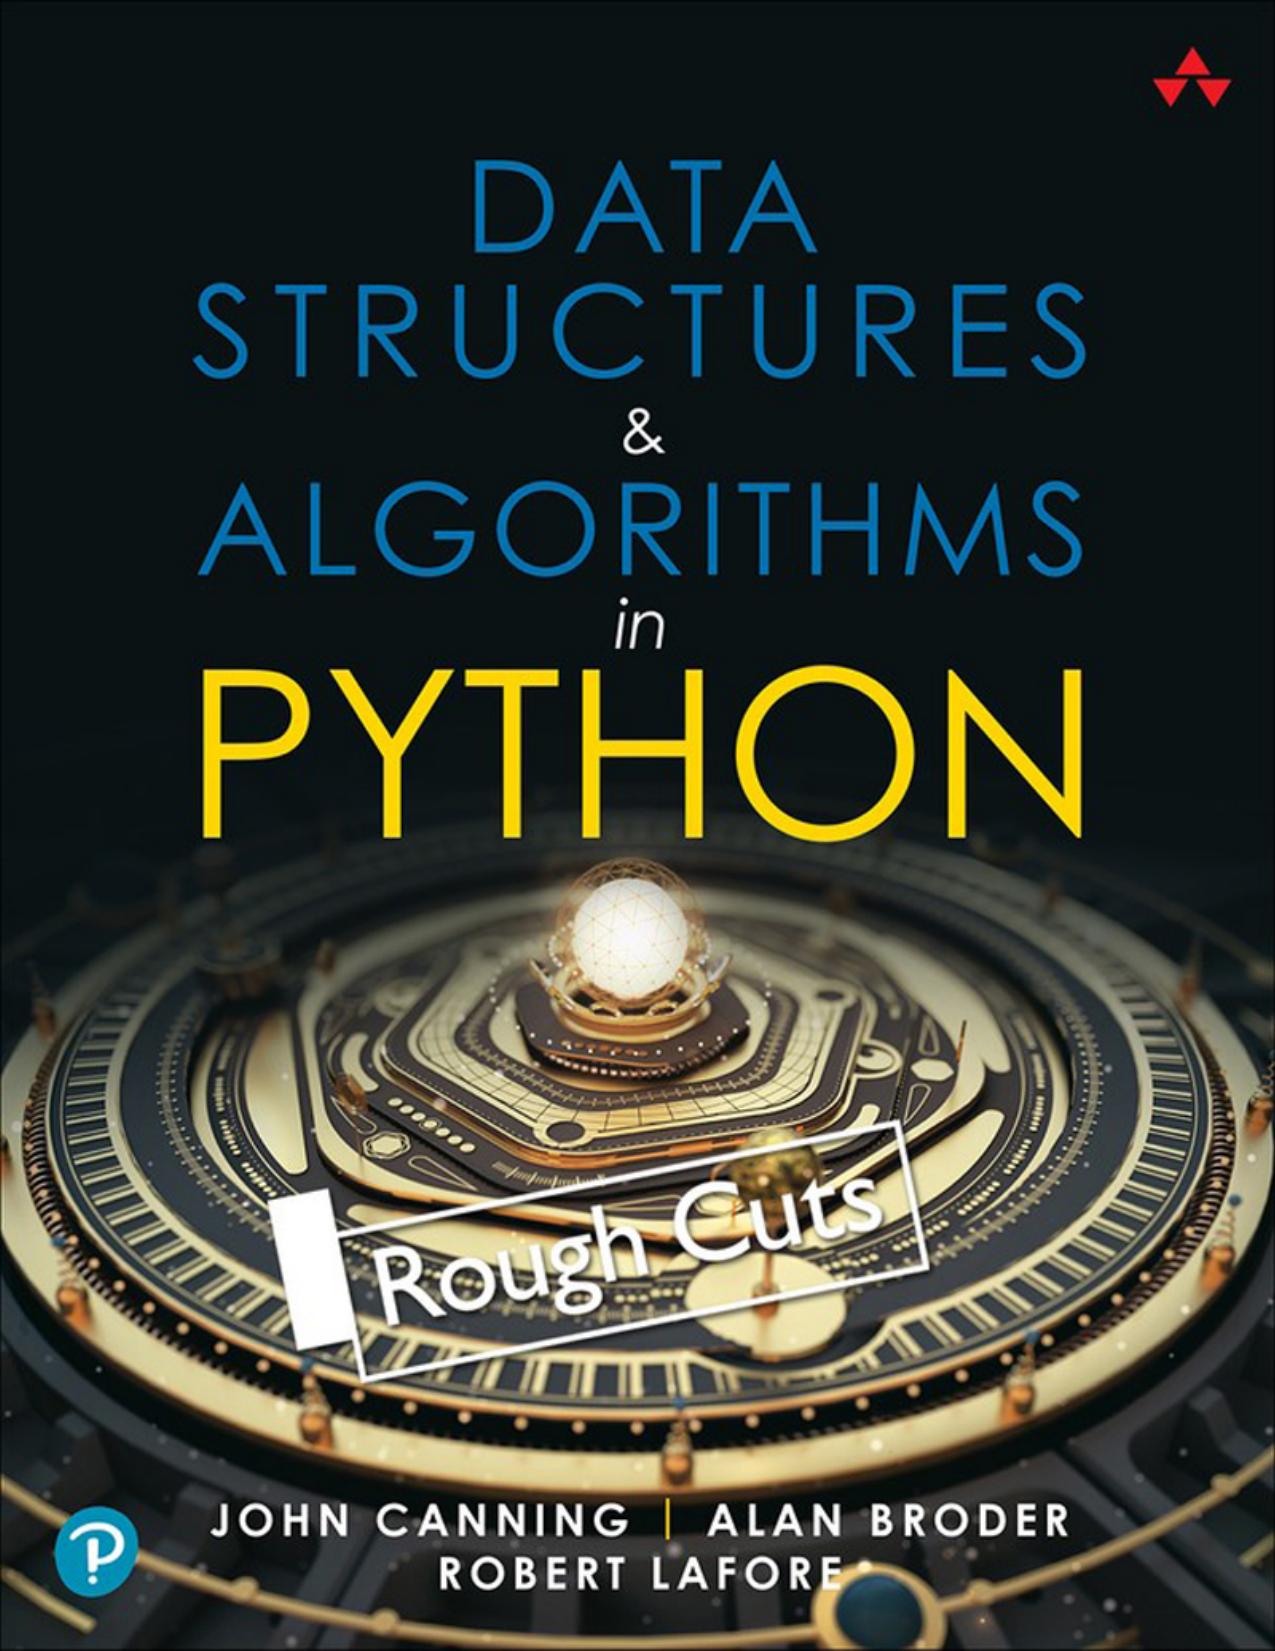 Data Structures & Algorithms in Python by John Canning & Alan Broder & Robert Lafore